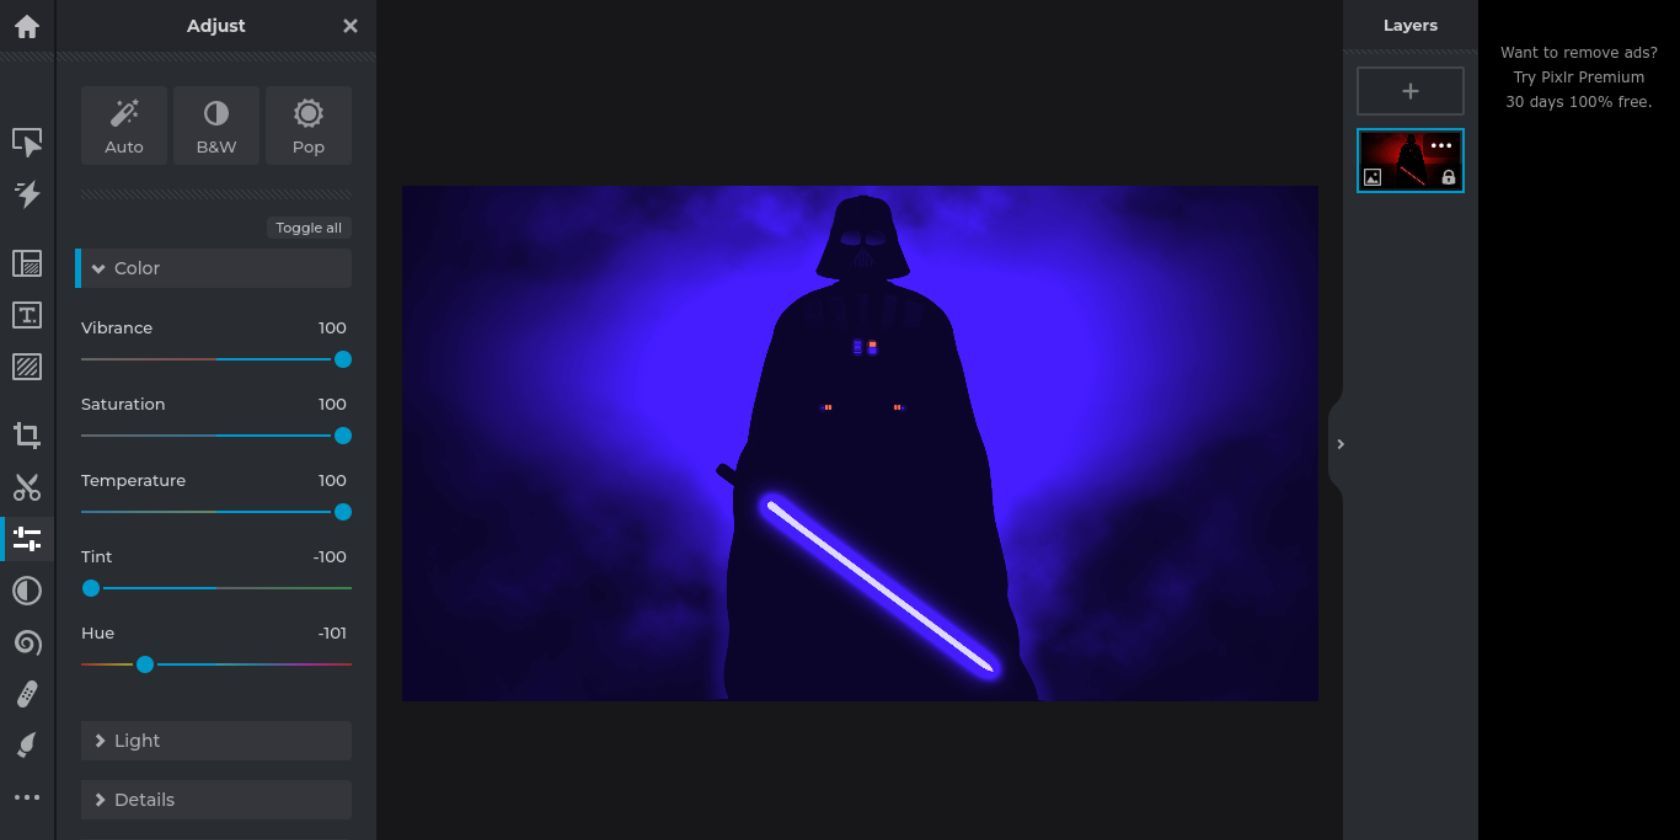 An edited image of Darth Vader on the Pixlr image editing web app